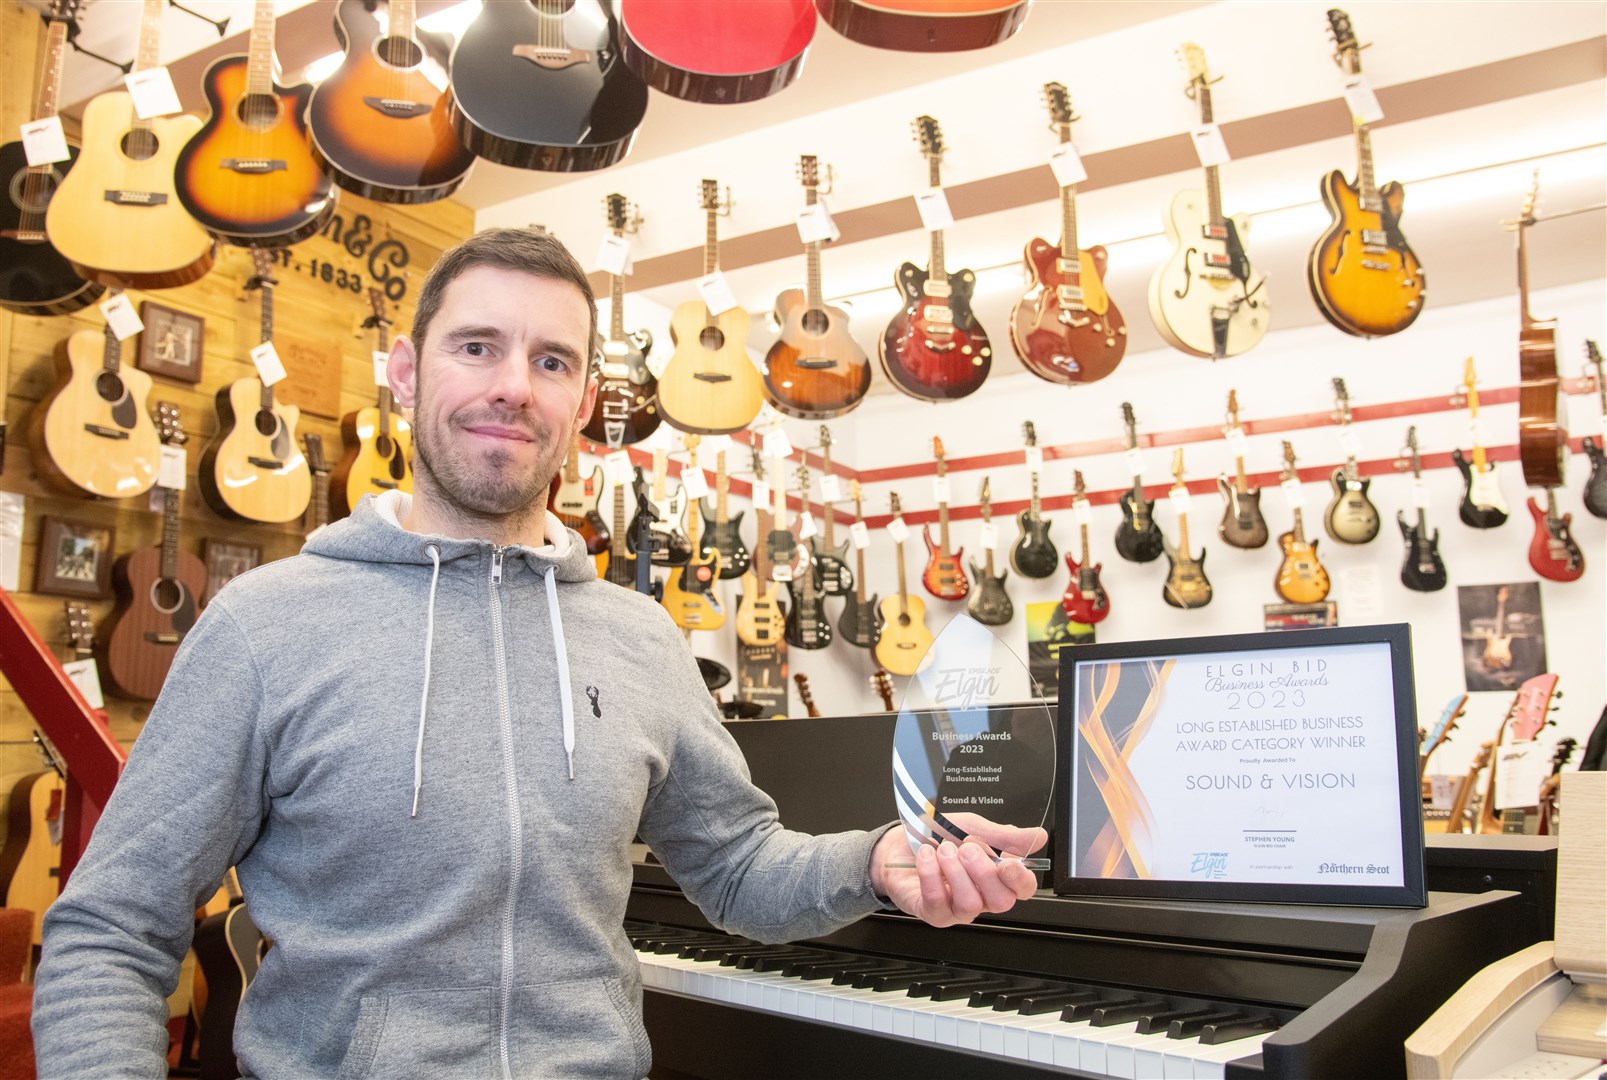 Graham Flett works at Sound & Vision with hid dad Vic. The music shop won the long-established business award. Picture: Daniel Forsyth.